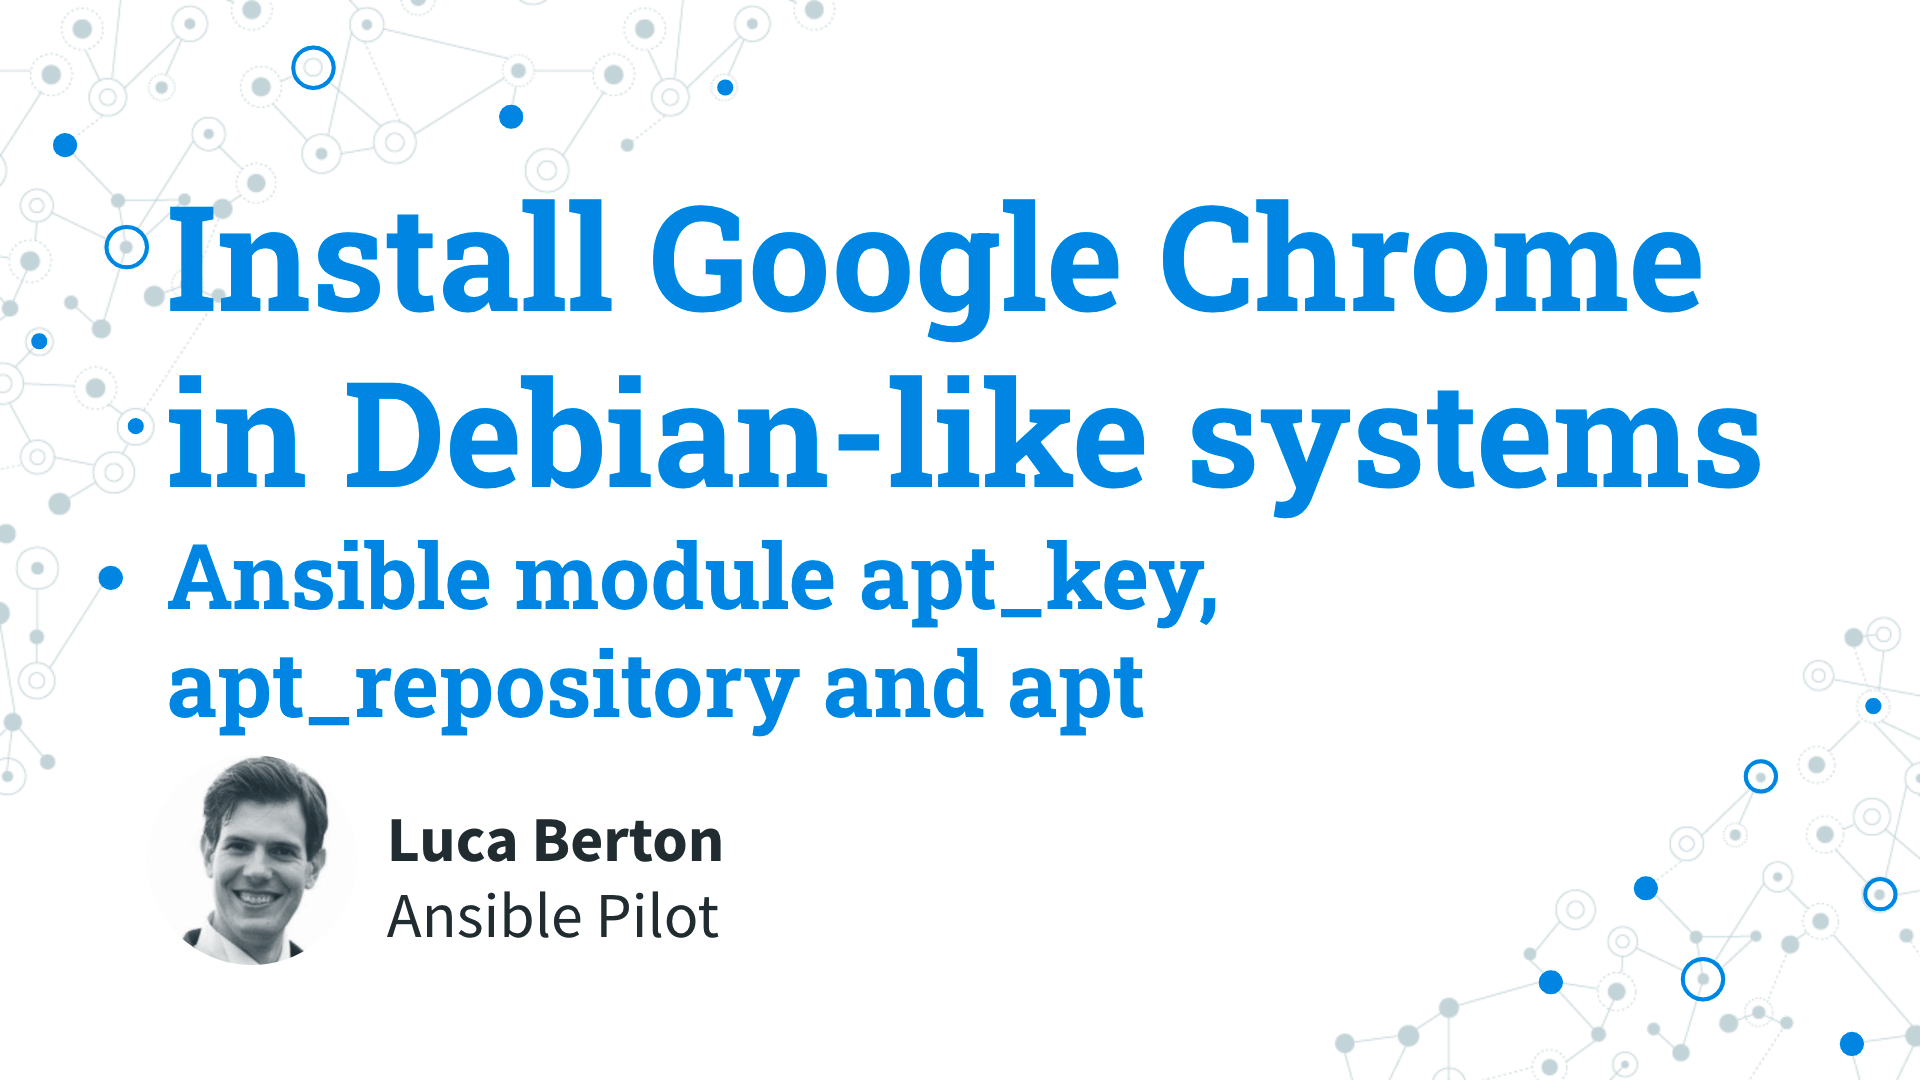 Install Google Chrome in Debian like systems - Ansible module apt_key, apt_repository and apt